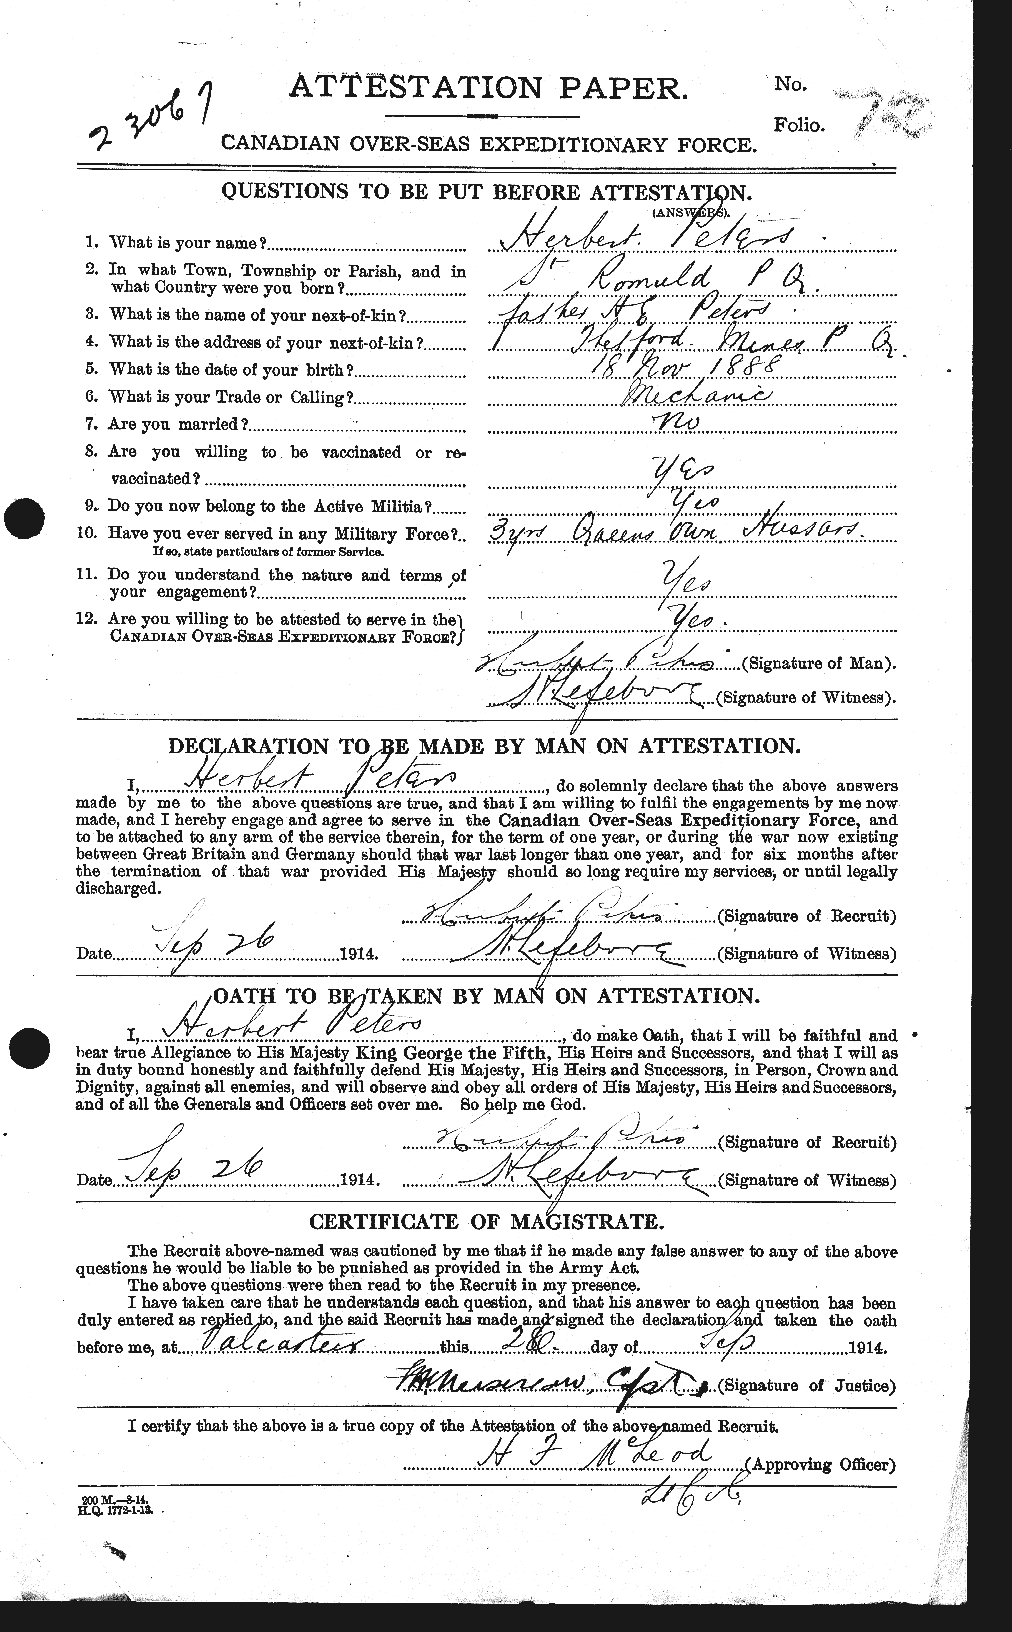 Personnel Records of the First World War - CEF 575498a